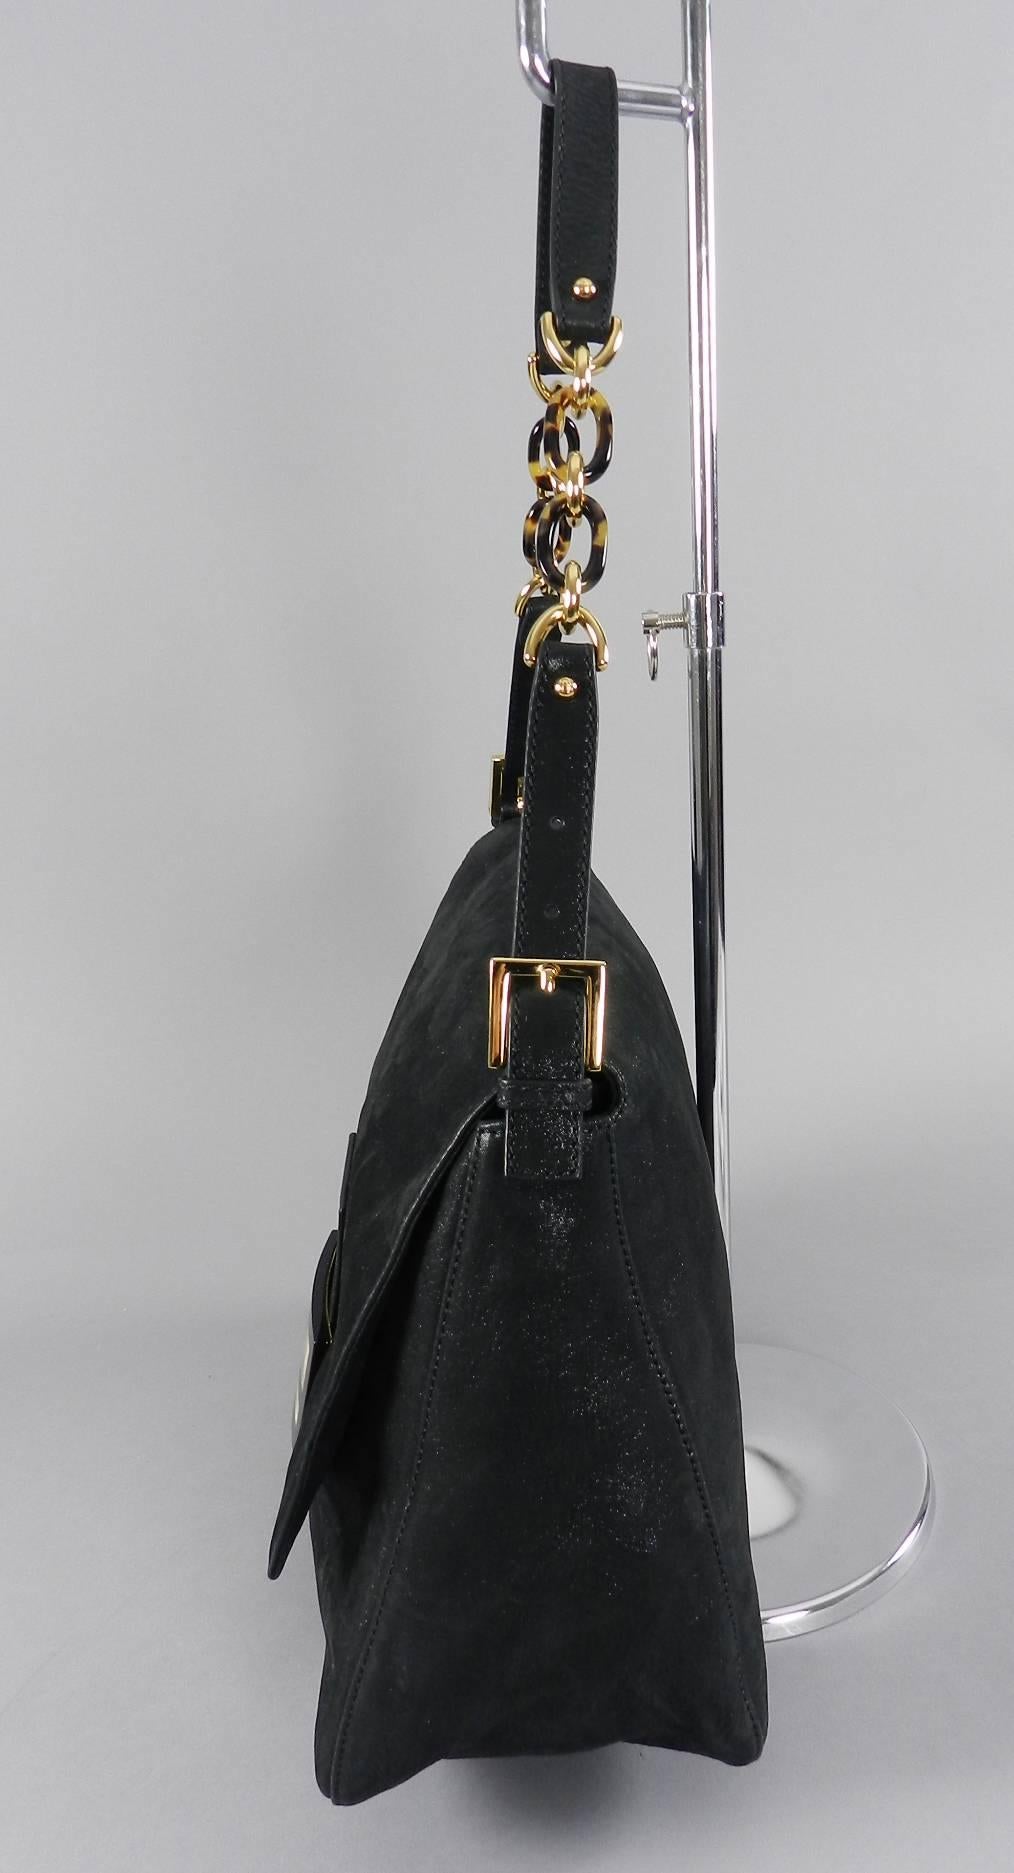 Fendi shimmering black suede Big Mamma shoulder bag with goldtone hardware. Large FF logo resin clasp and faux tortoise link chain. Excellent clean condition – used only once if ever. Original cards and duster.  Body of bag measures 14 x 10 x 5.5”